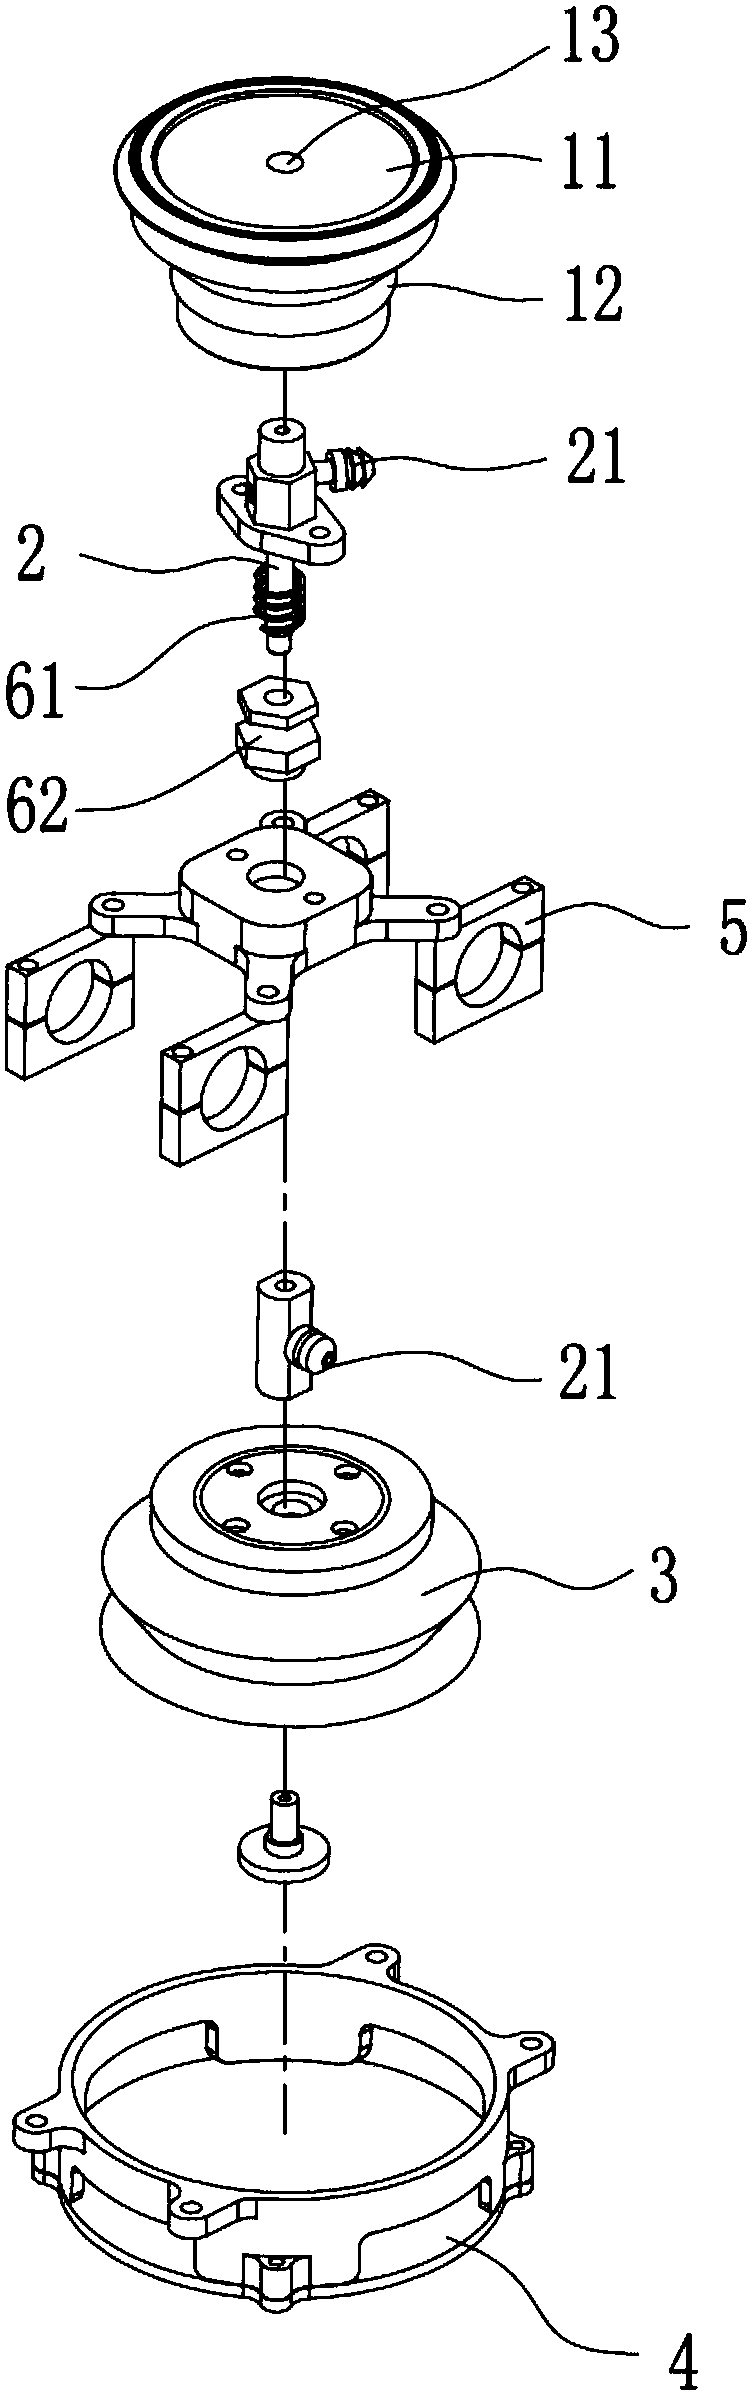 Sliding sucking-cup assembly with backpressure sucking cup and curtain wall robot applying same